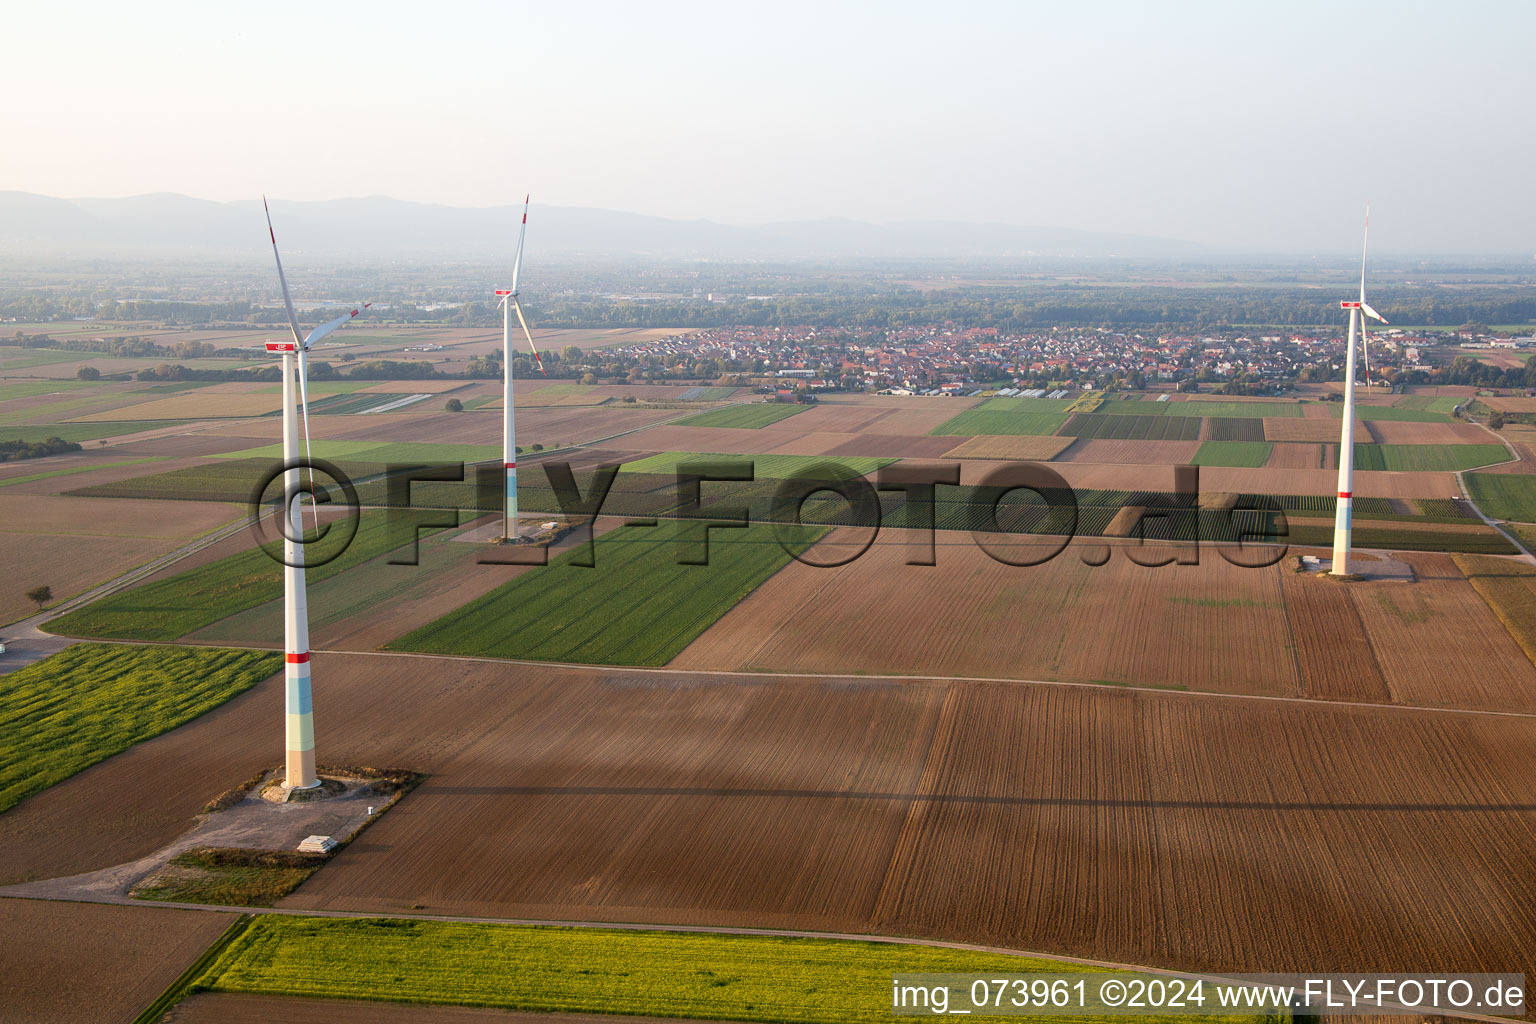 Aerial view of Wind farm in Offenbach an der Queich in the state Rhineland-Palatinate, Germany